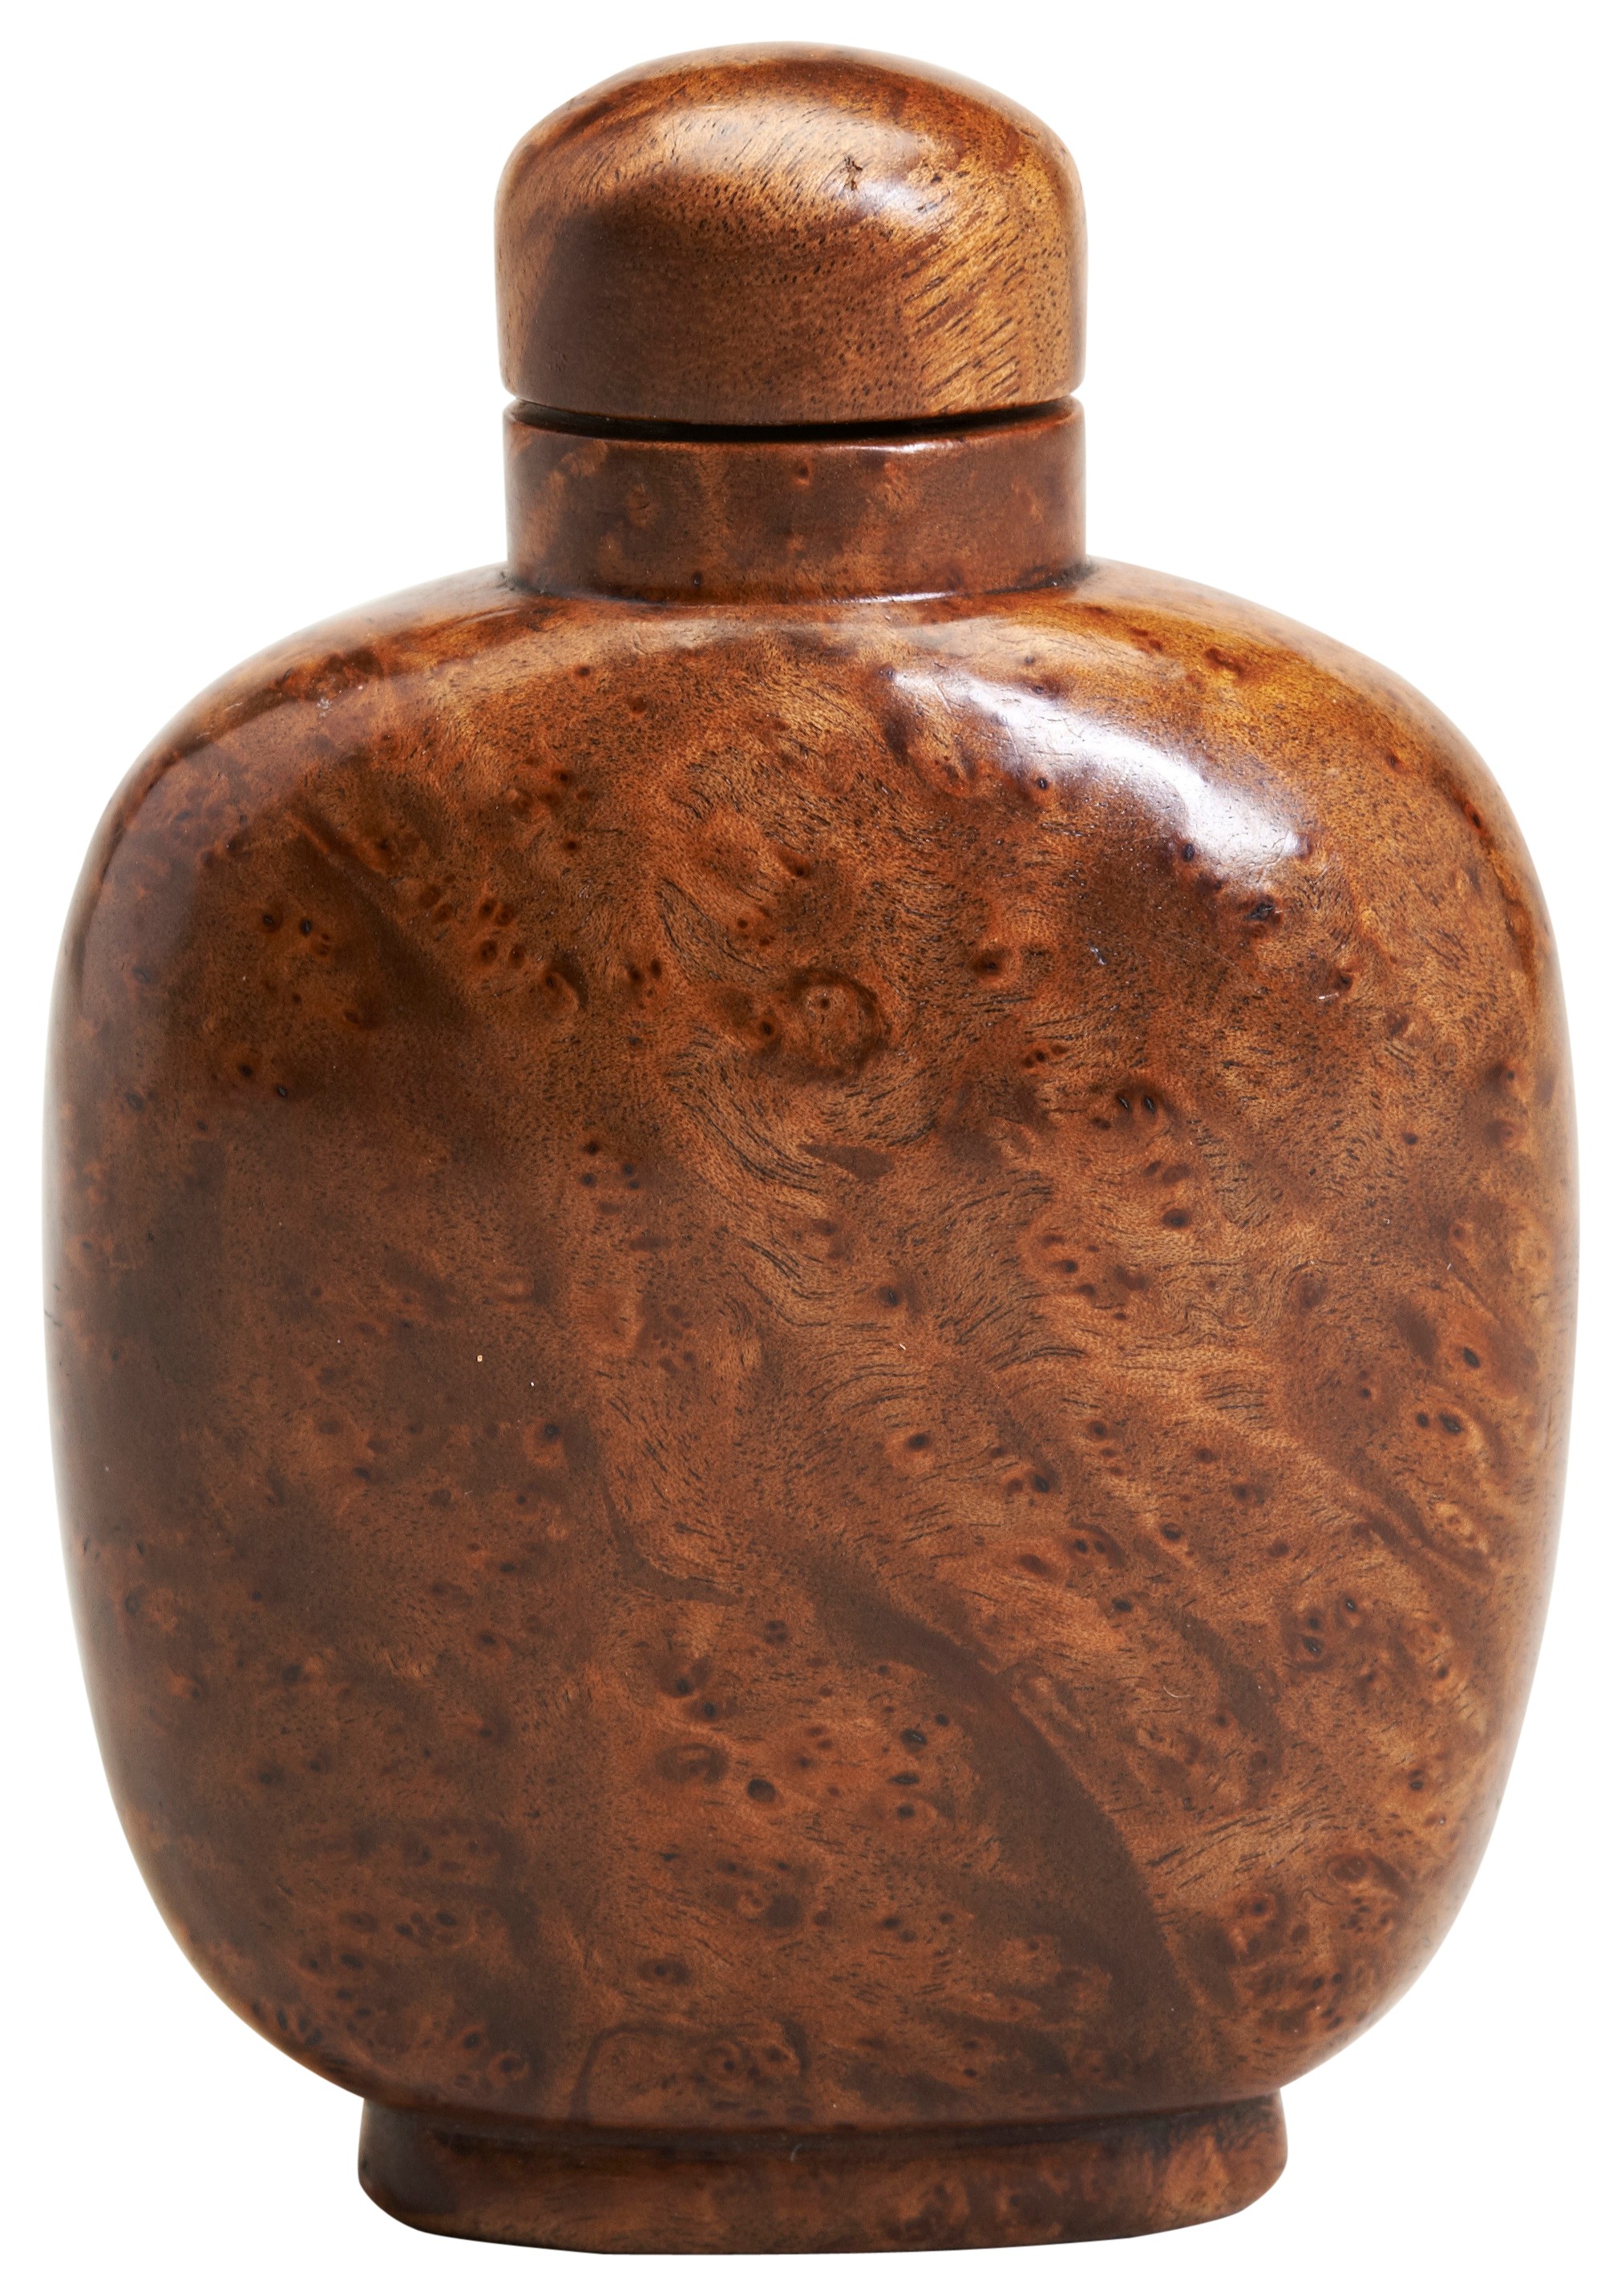 A BURRWOOD SNUFF BOTTLE AND STOPPER  20TH CENTURY  with natural wood grain.